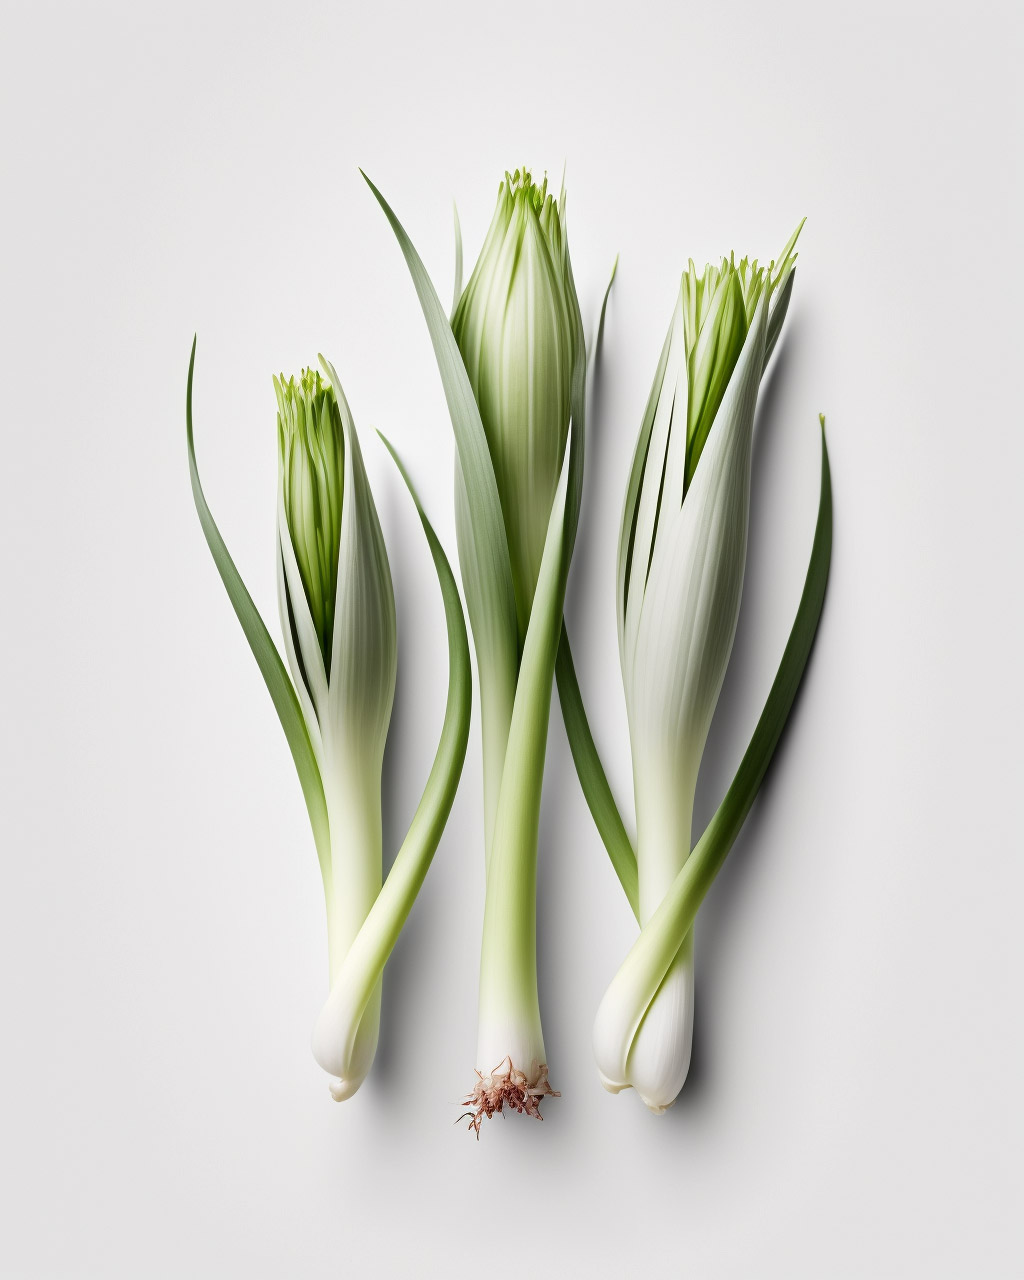 leeks as white onion substitute